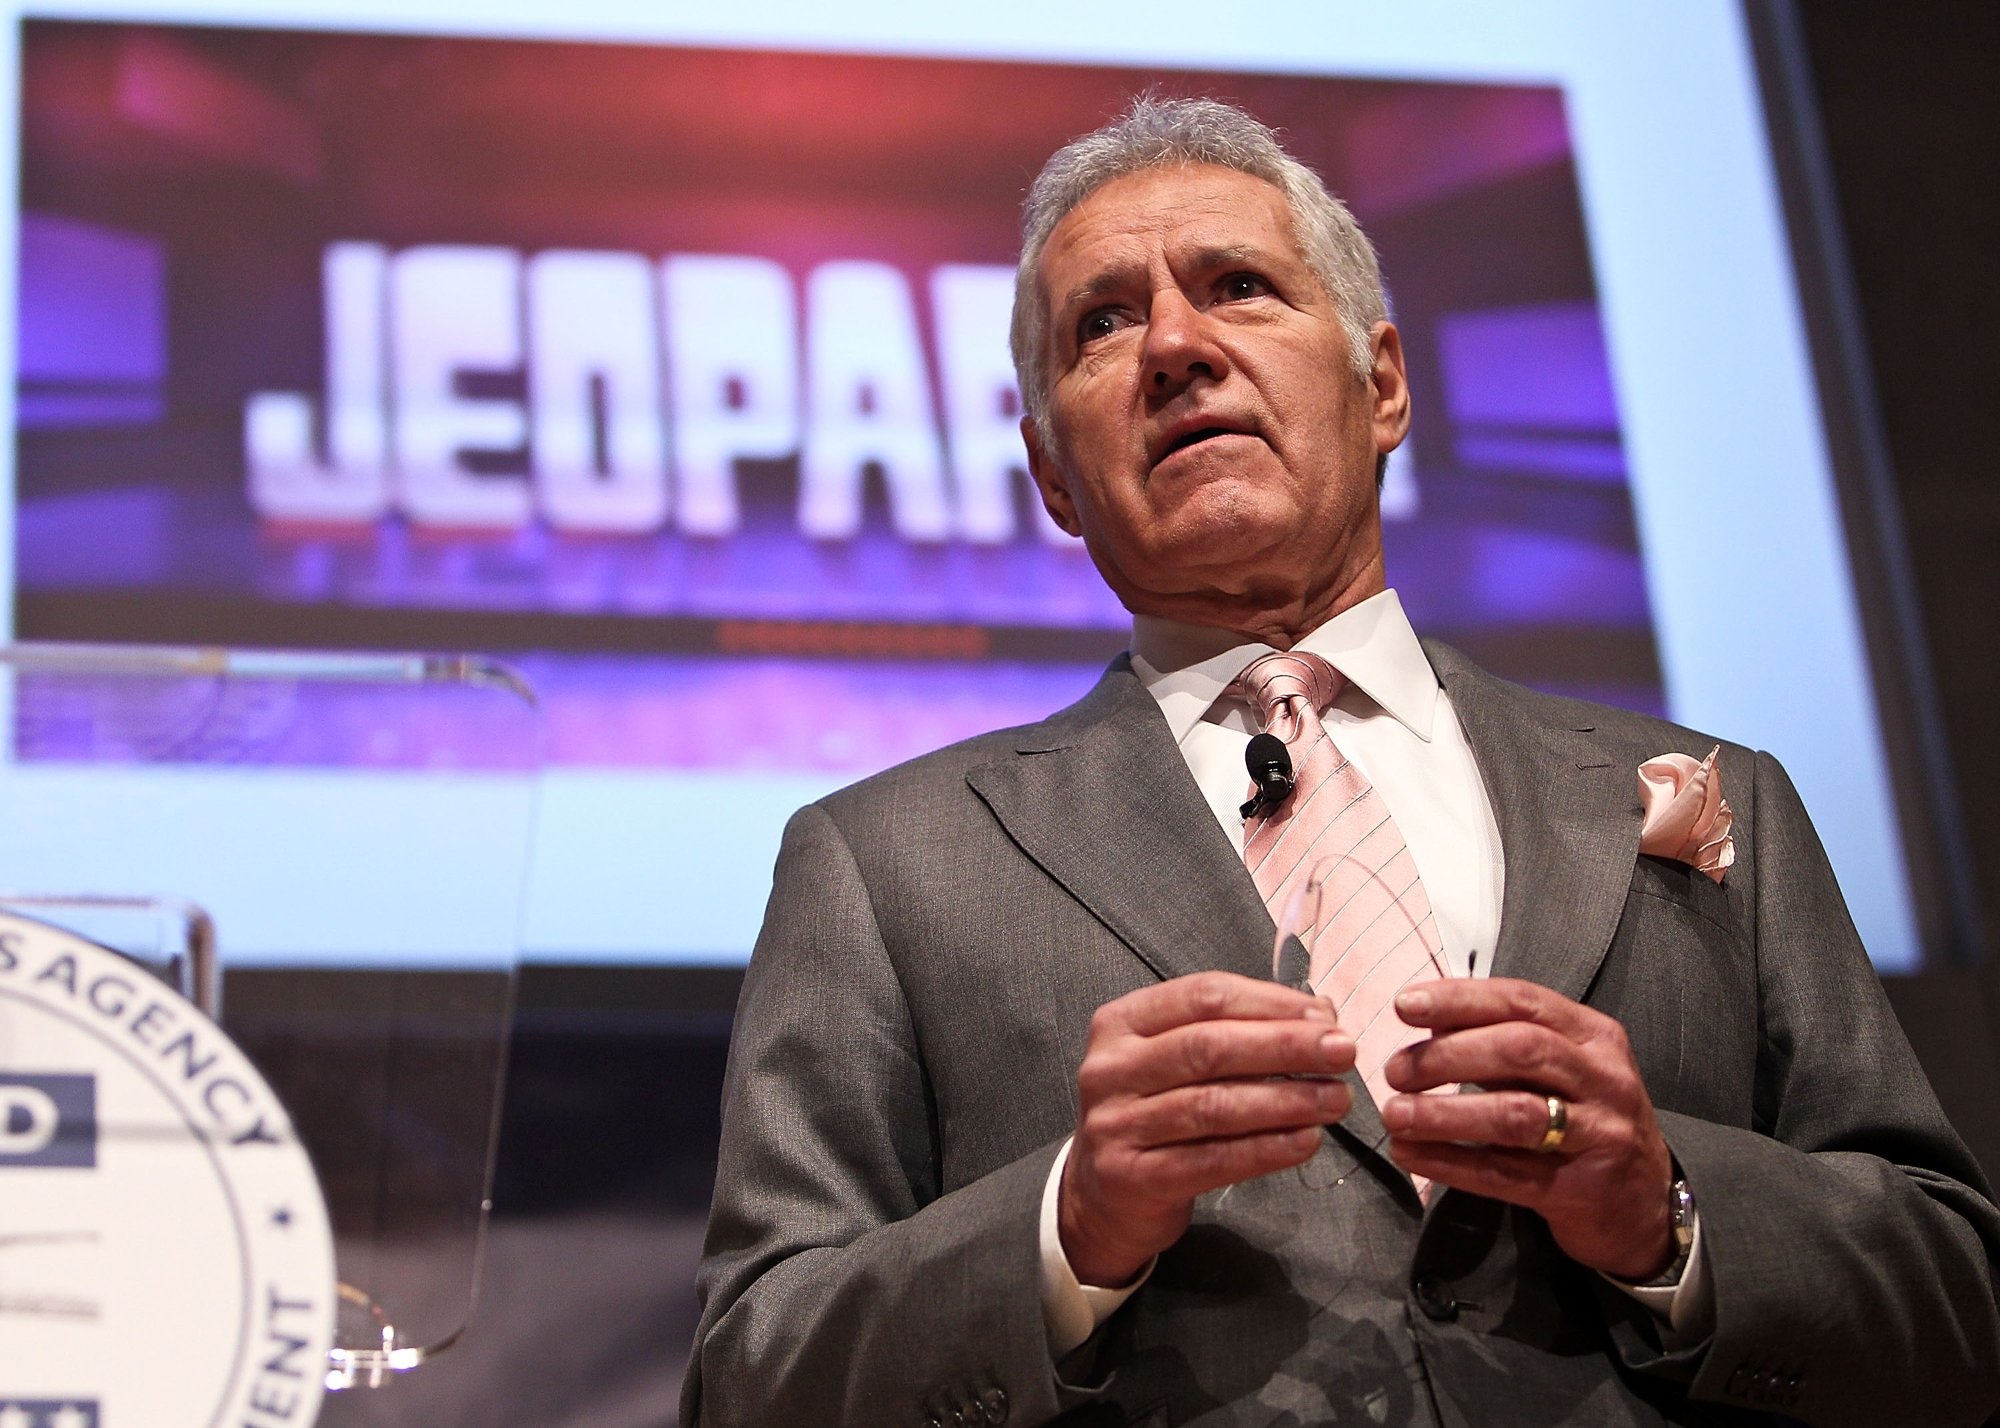 'Jeopardy!' Alex Trebek, who interacted with the contestant as a host. He's wearing a suit looking ahead with the show's logo on the screen behind him.